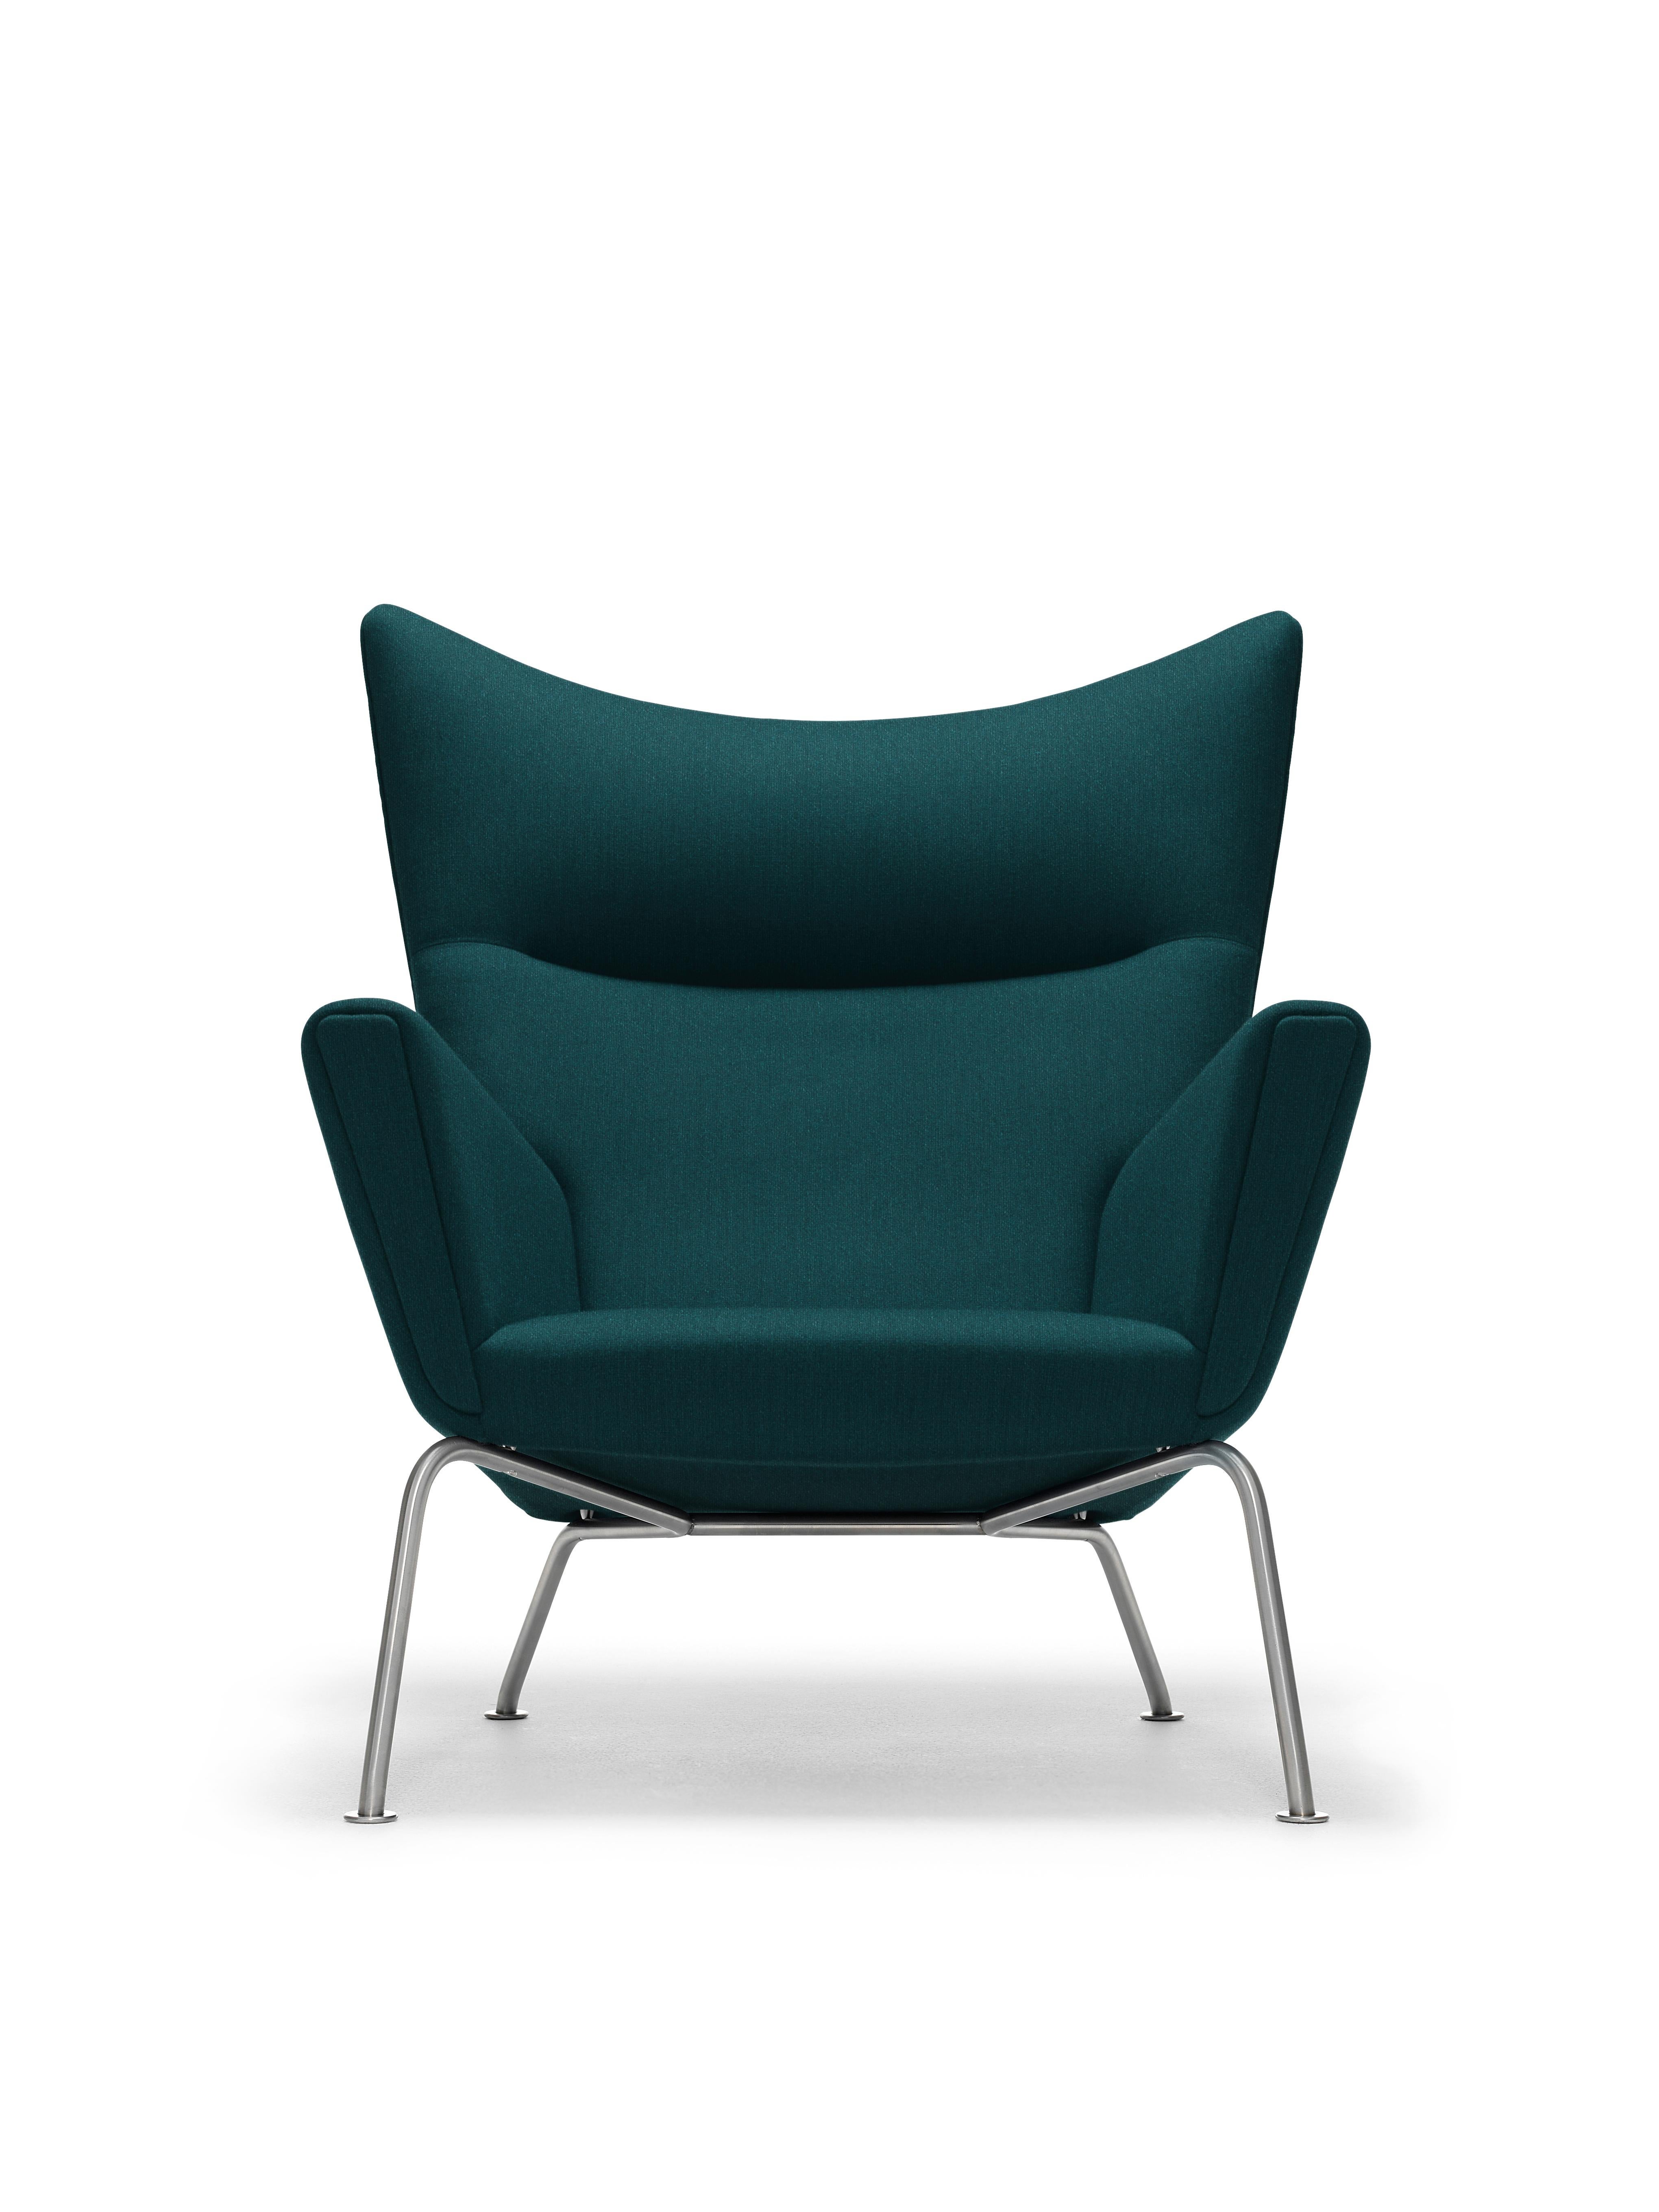 Green (Kvadrat ForestNap 992) CH445 Wing Chair in Fabric with Stainless Steel Base by Hans J. Wegner